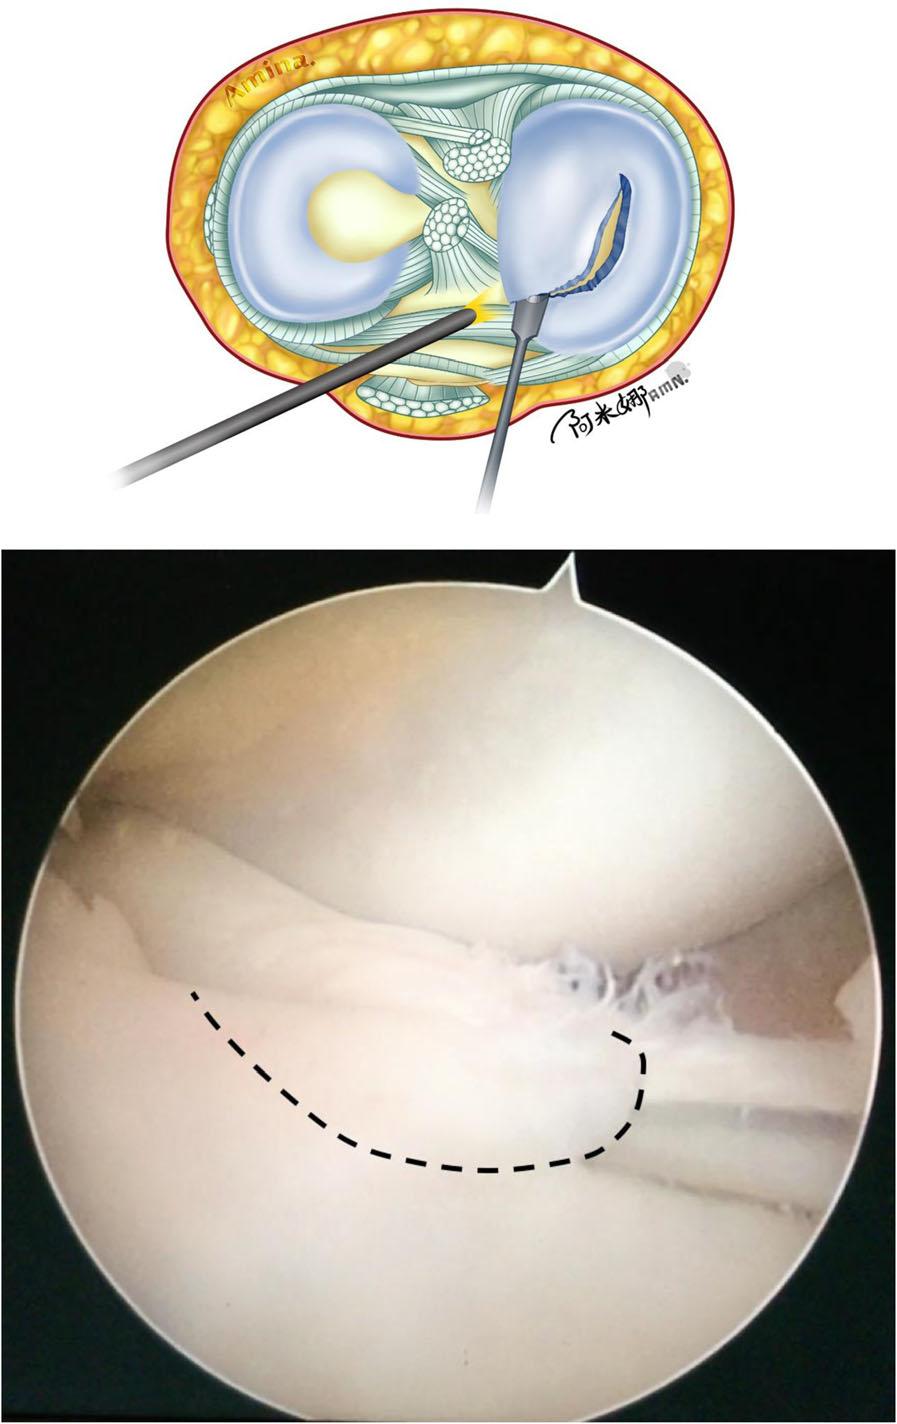 IF inner fragment First, a 30 angle arthroscope is inserted through the high anterolateral portal.